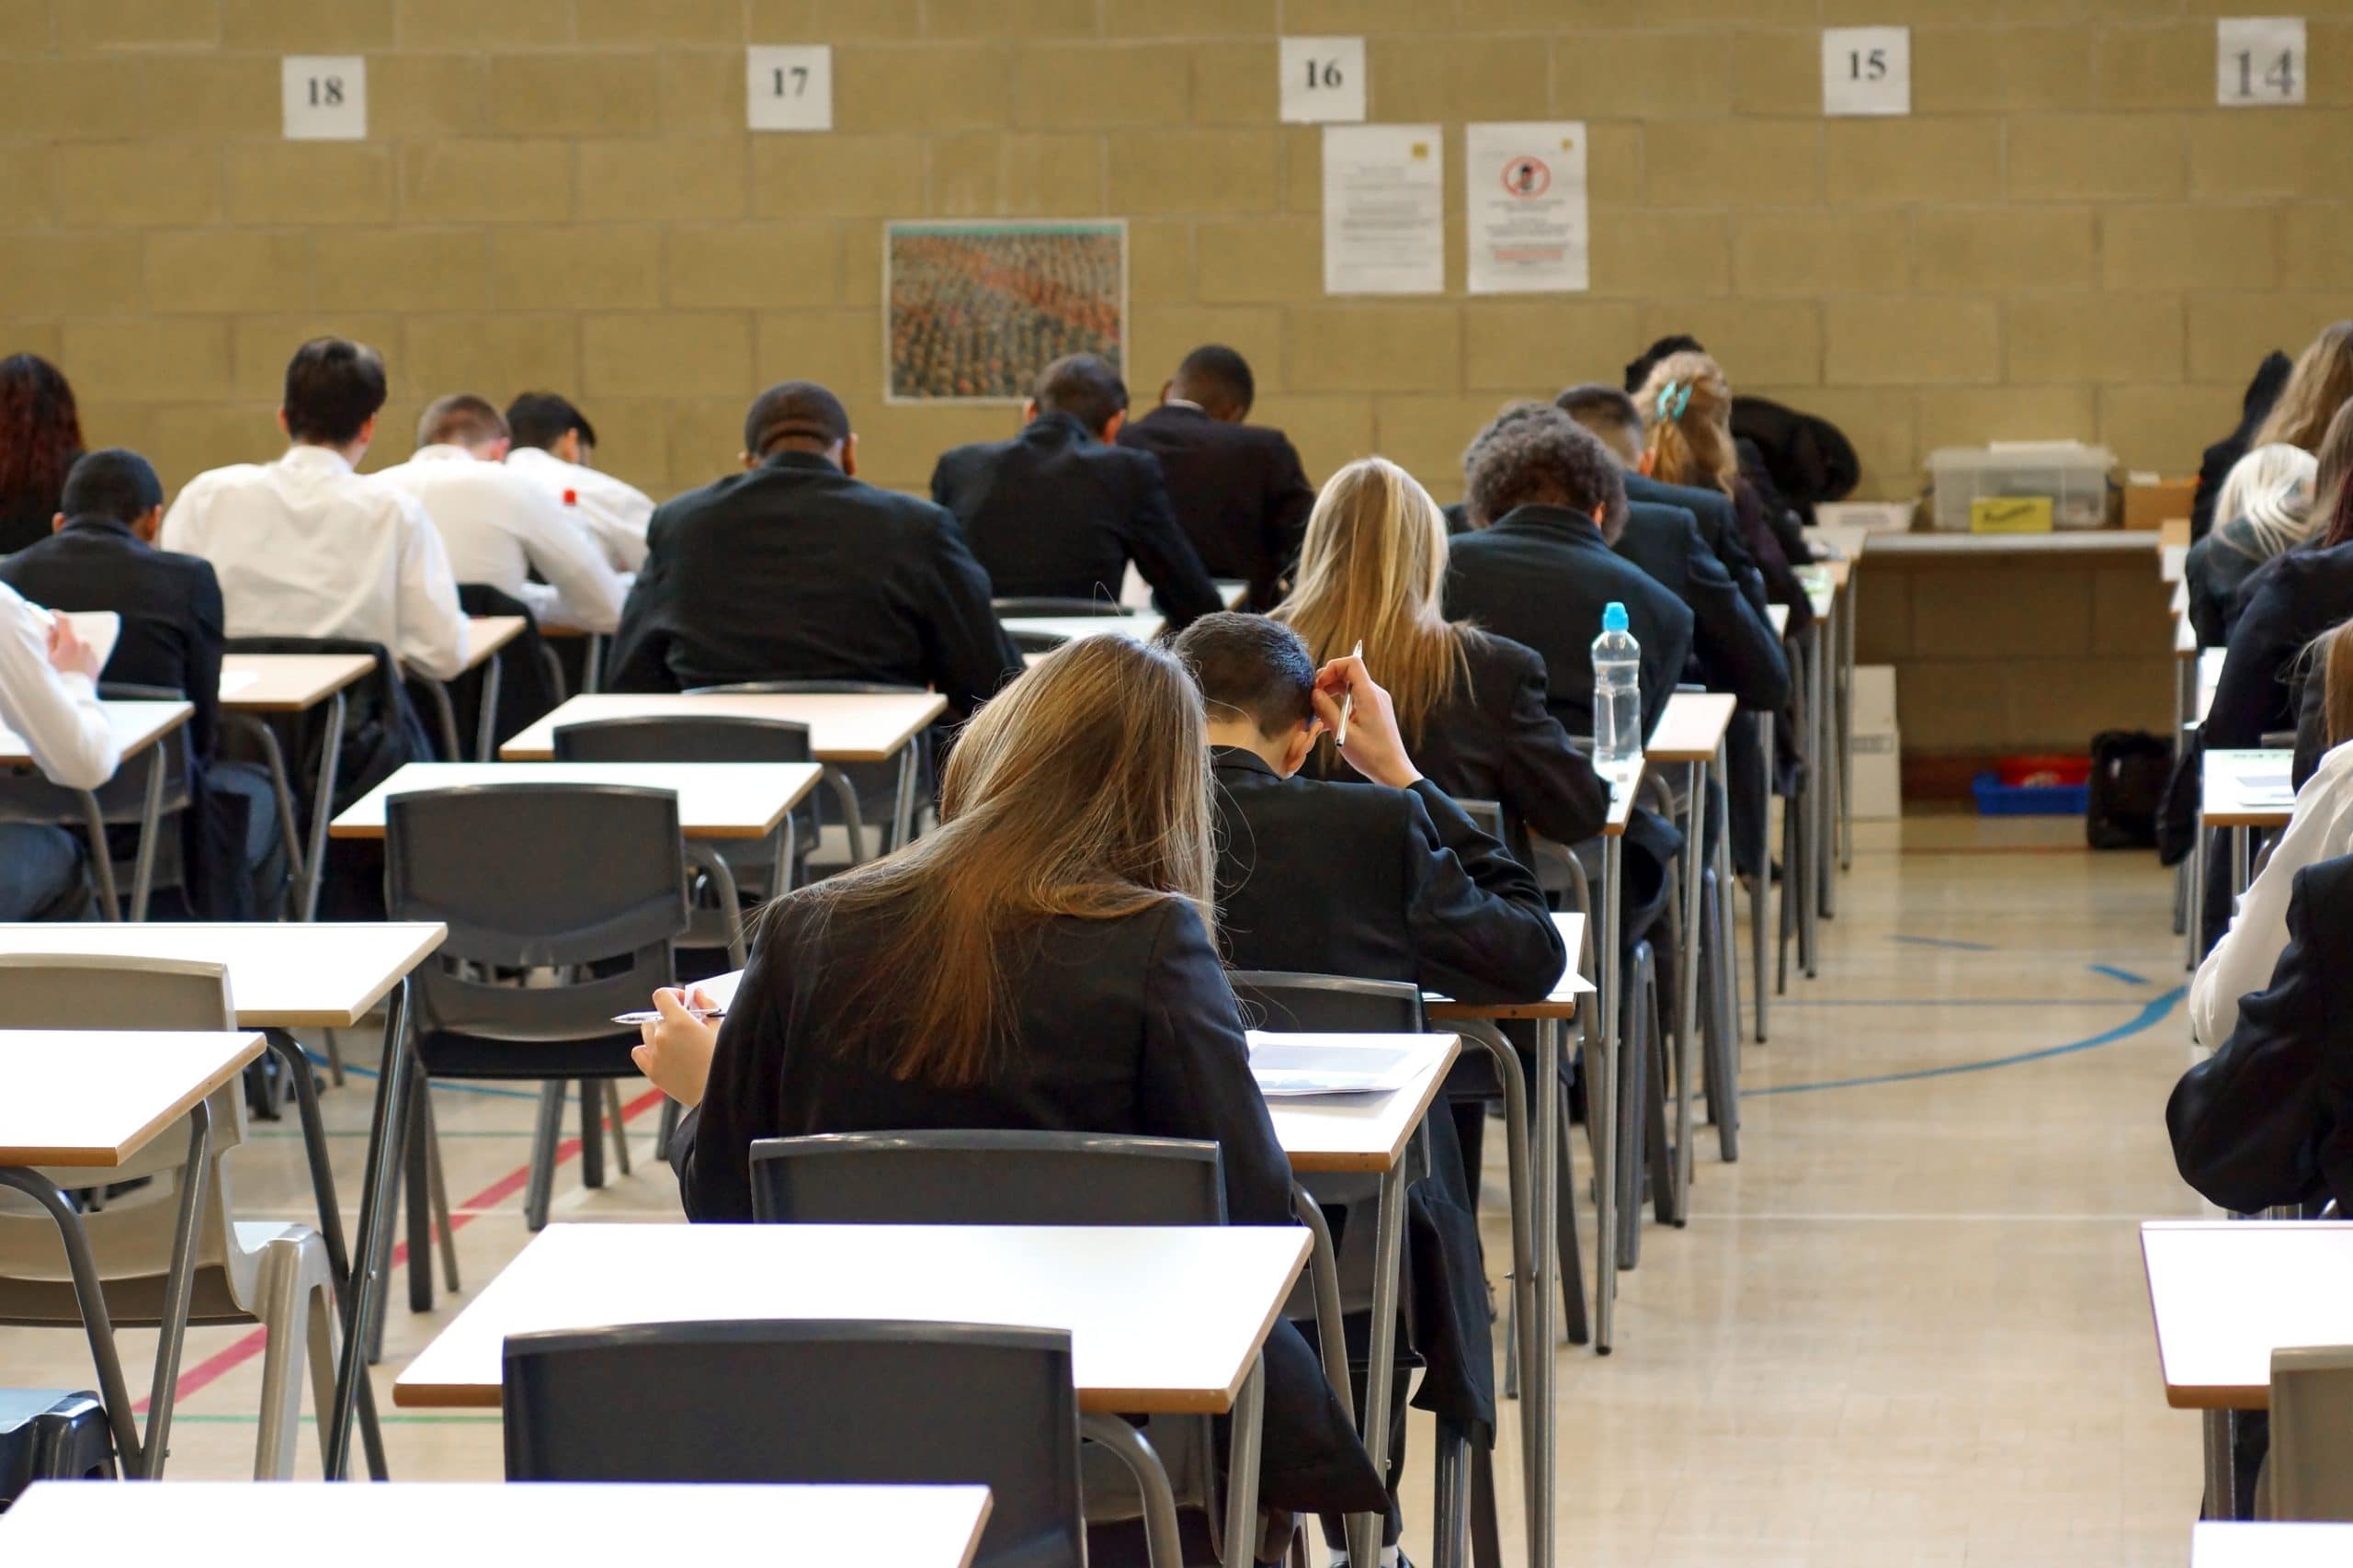 Students sitting in an exam hall.